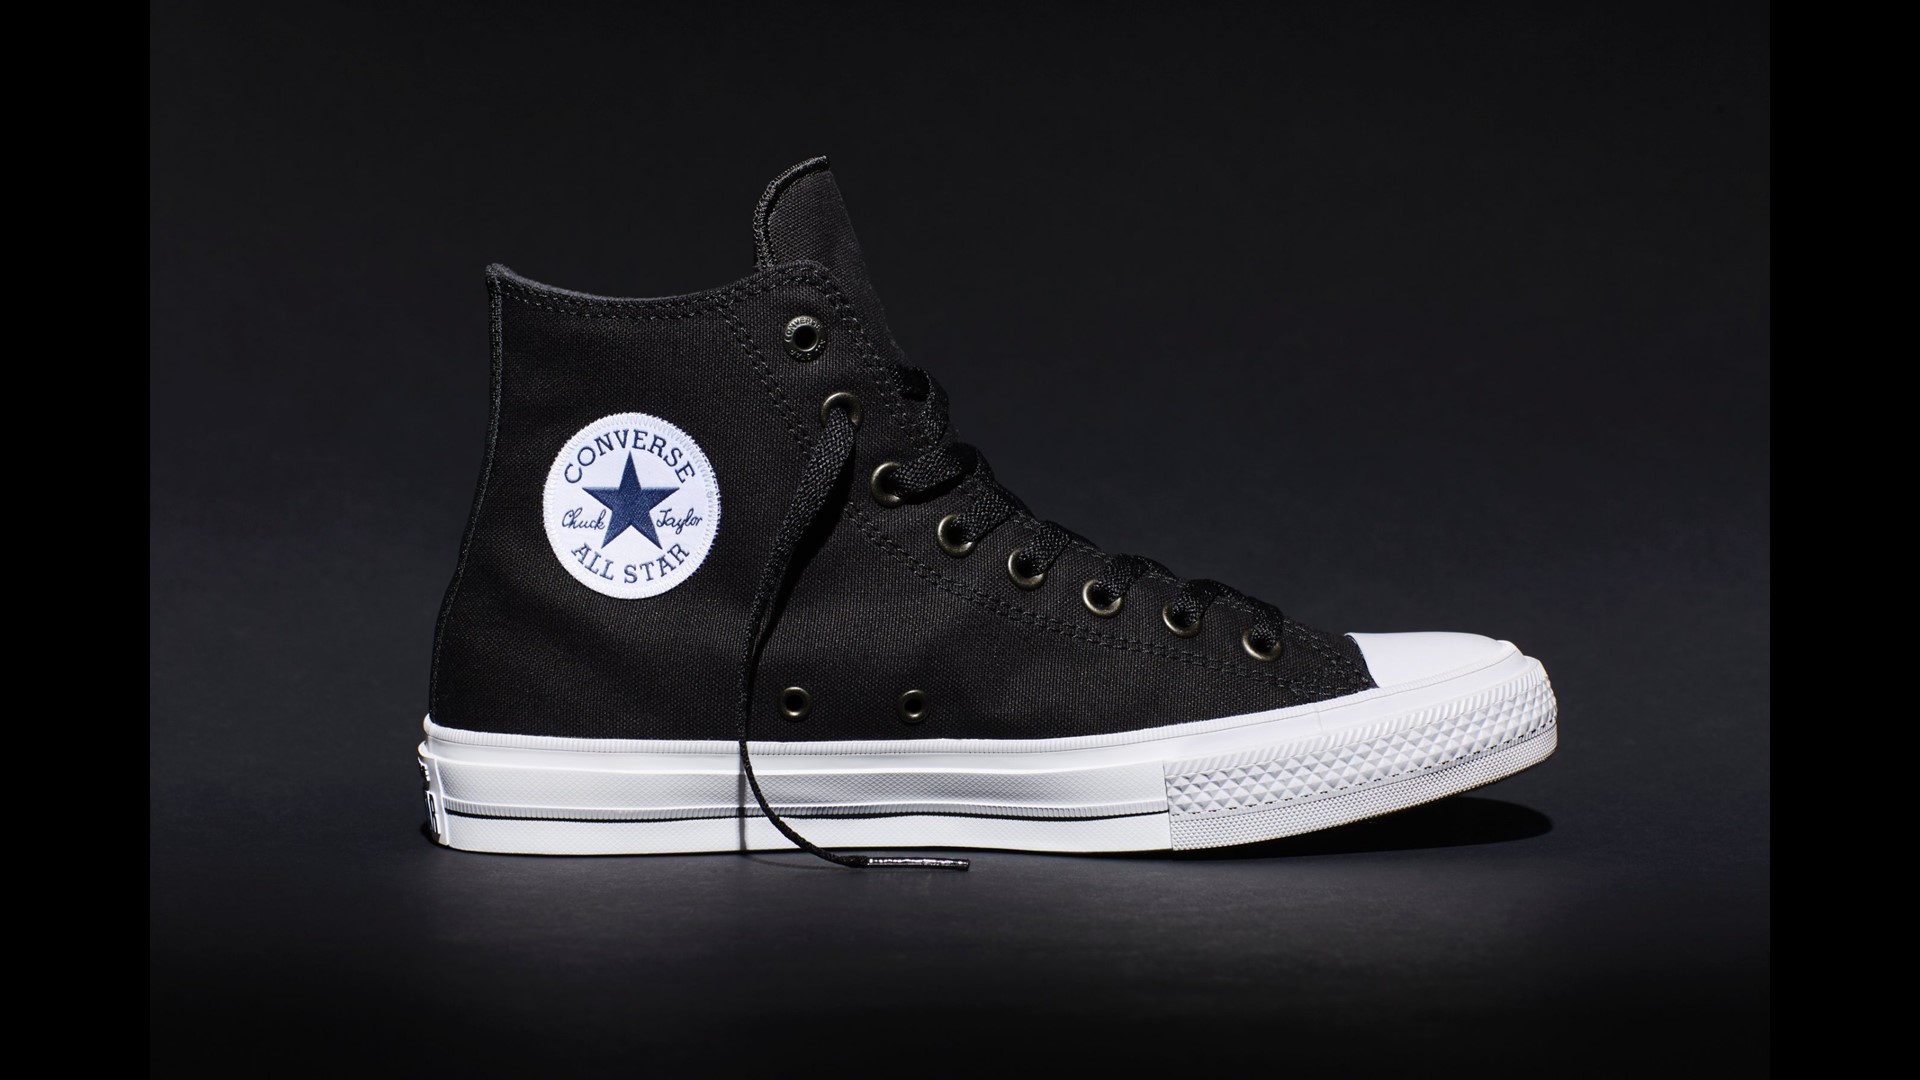 Converse redesigns iconic Chuck Taylor All-Star shoes – first time in ...